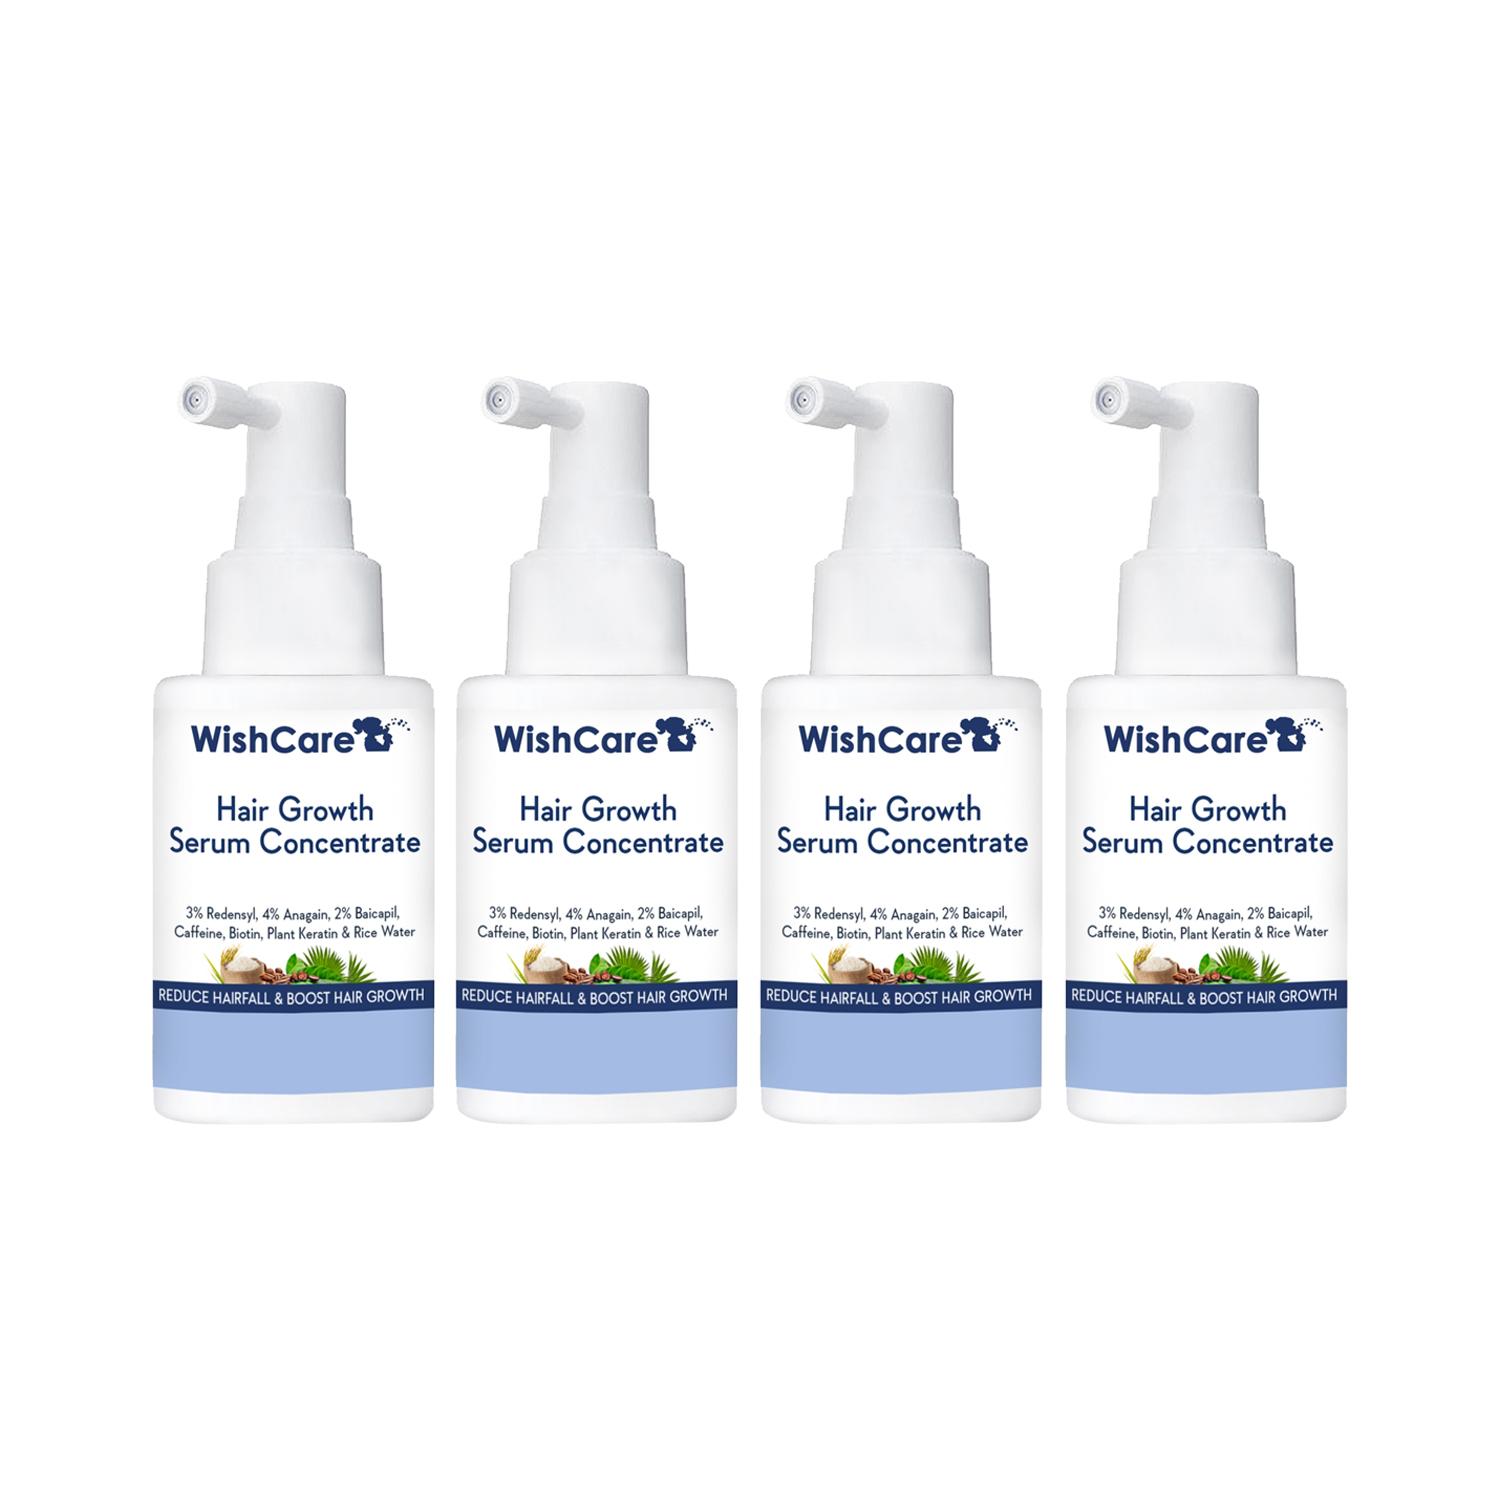 WishCare | WishCare Hair Growth Serum Concentrate - Pack of 4